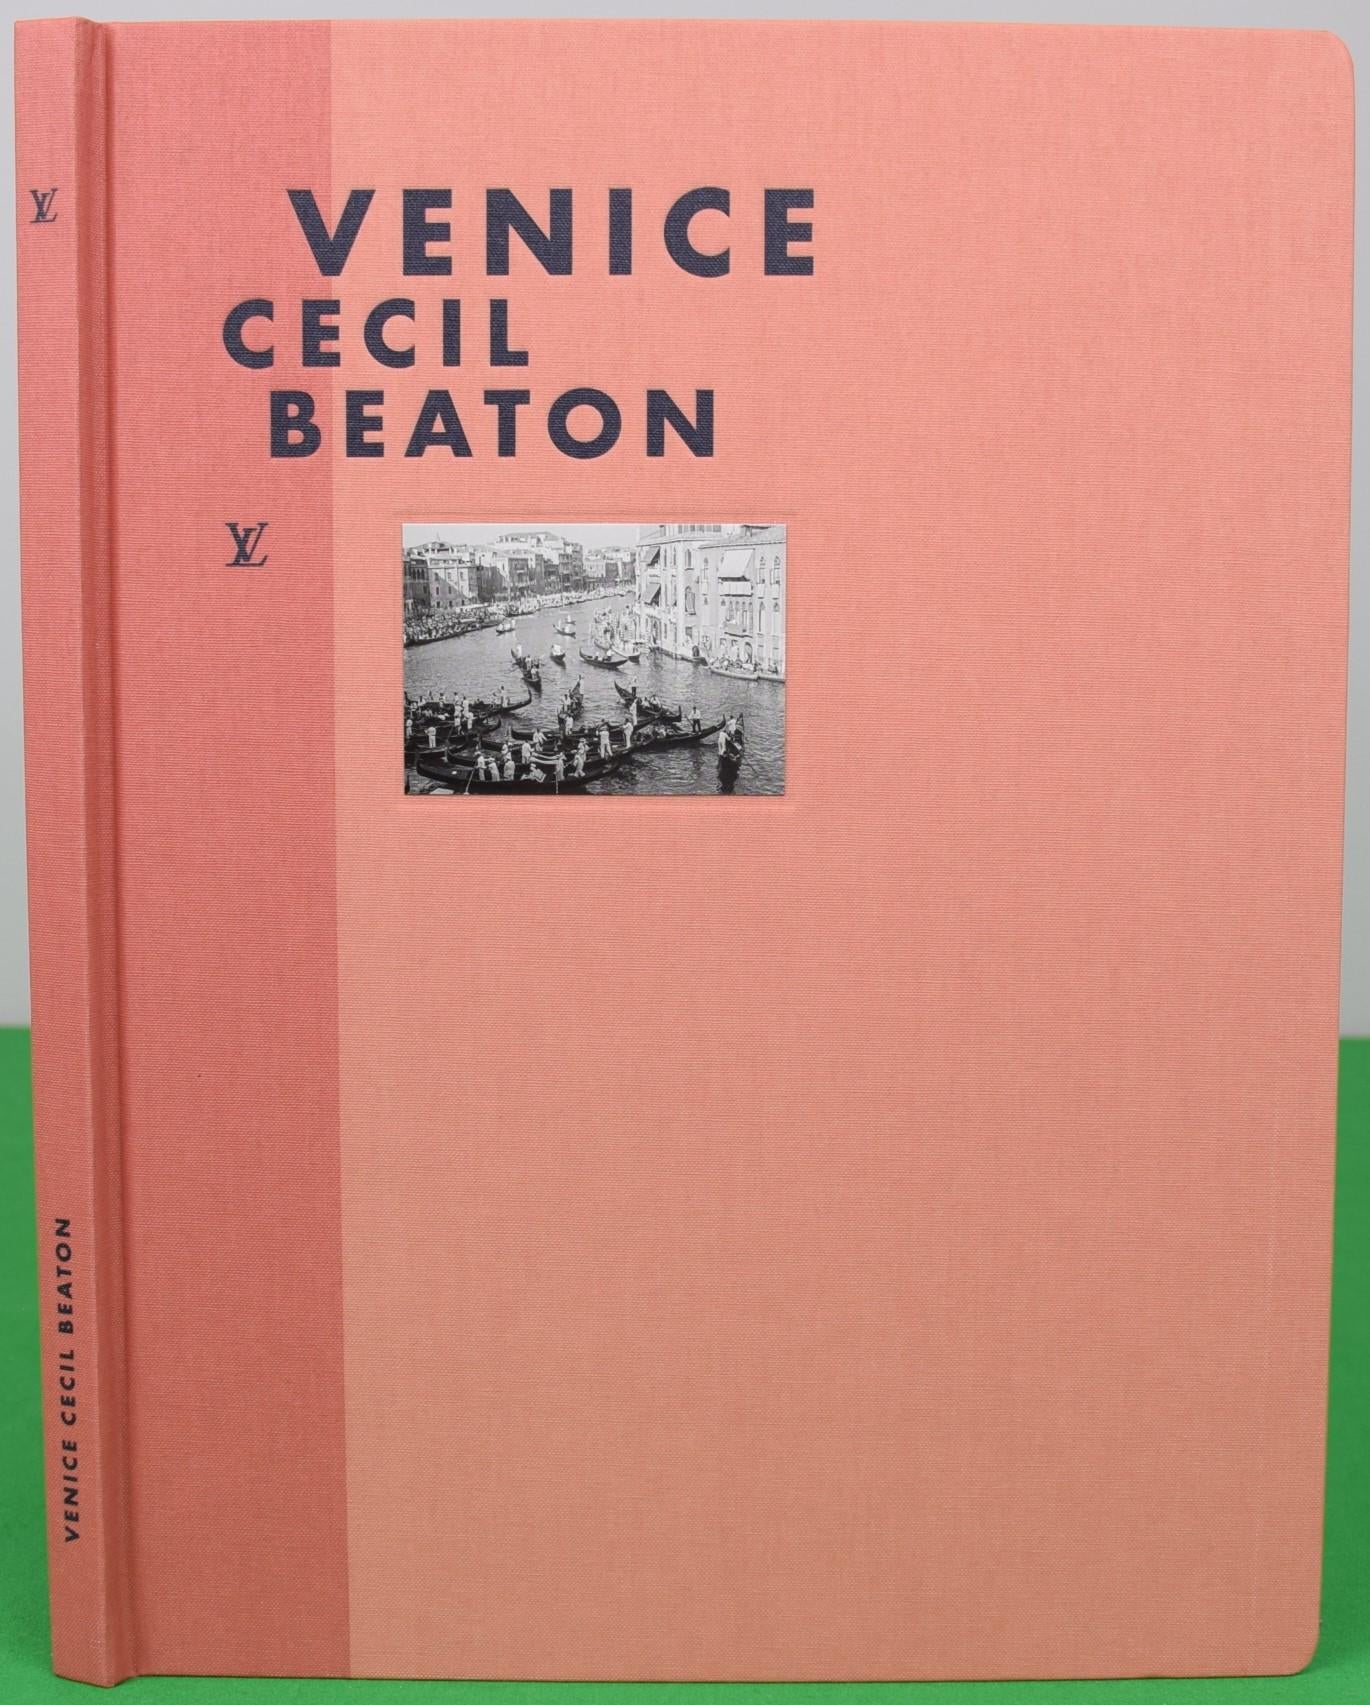 BEATON, Cecil

Edited by Pierre Bessard

[124] pp.

Louis Vuitton Malletier

2021

12 1/2" x 9 1/2"

Photographs by Cecil Beaton. Edited by Patrick Remy. Essay by Philippe Garner. Foreword by Countess Cristiana Brandolini d'Adda. 

Louis Vuitton